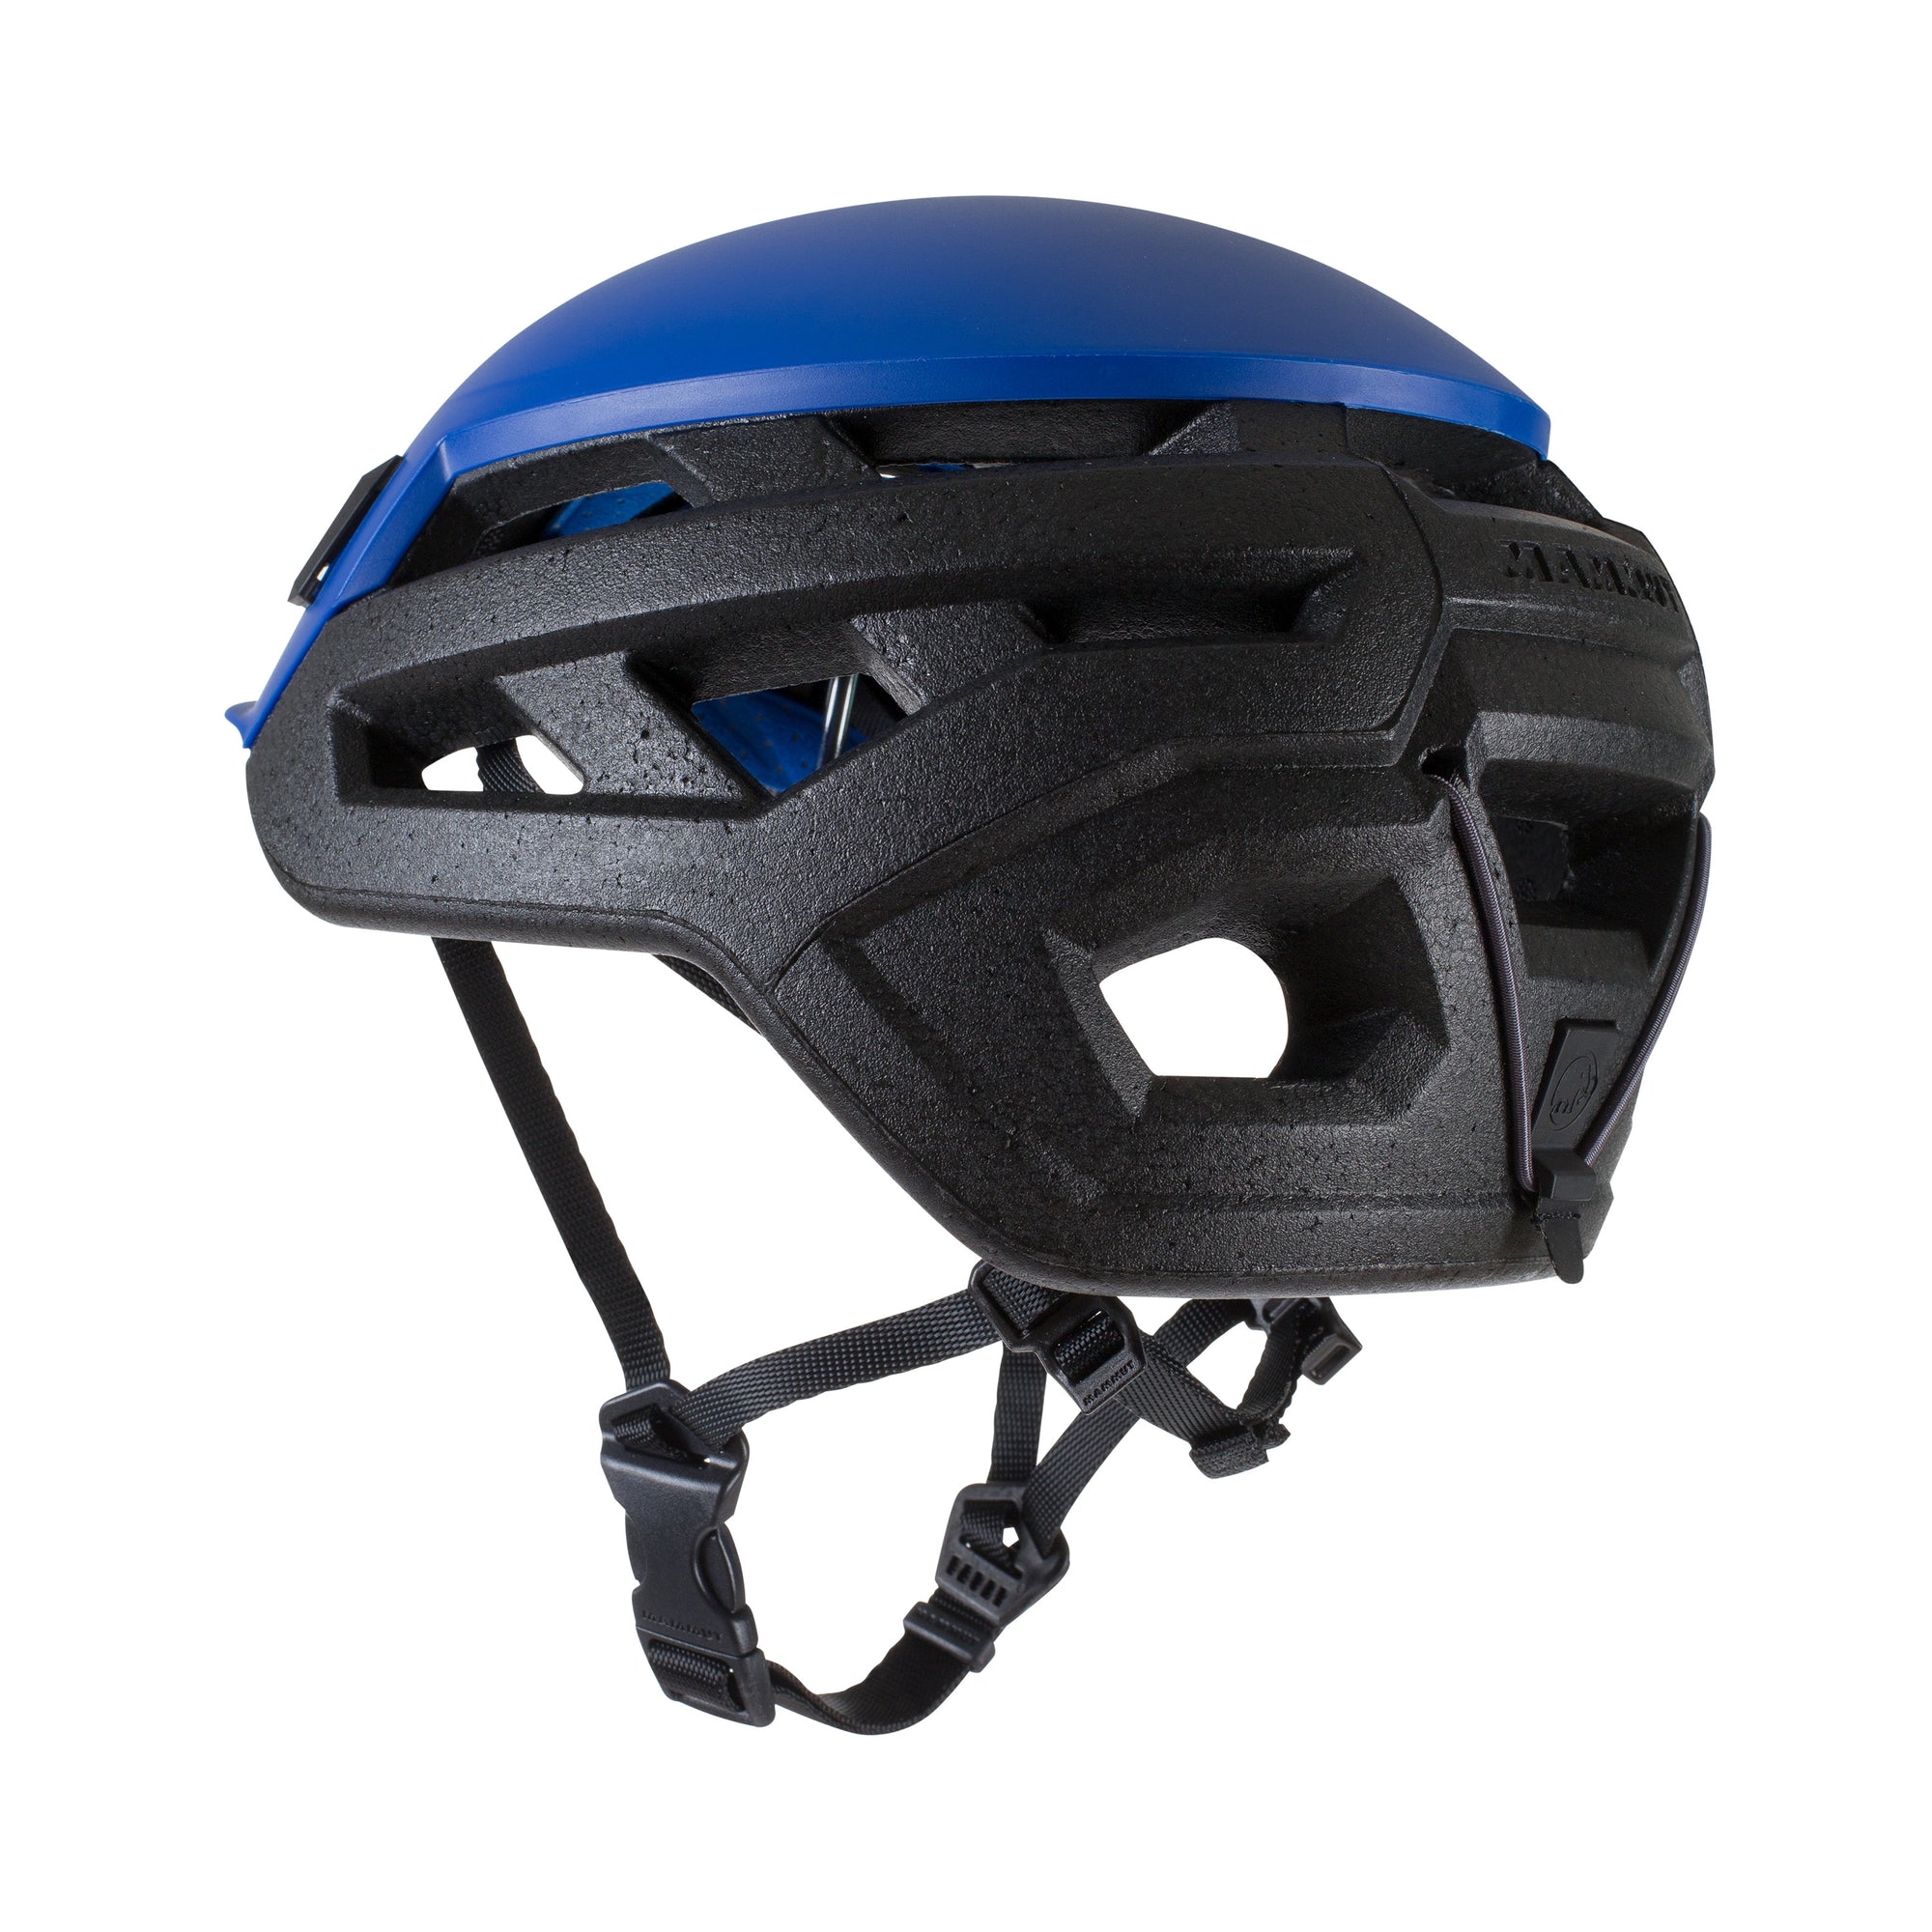 back view of wall rider helmet in blue